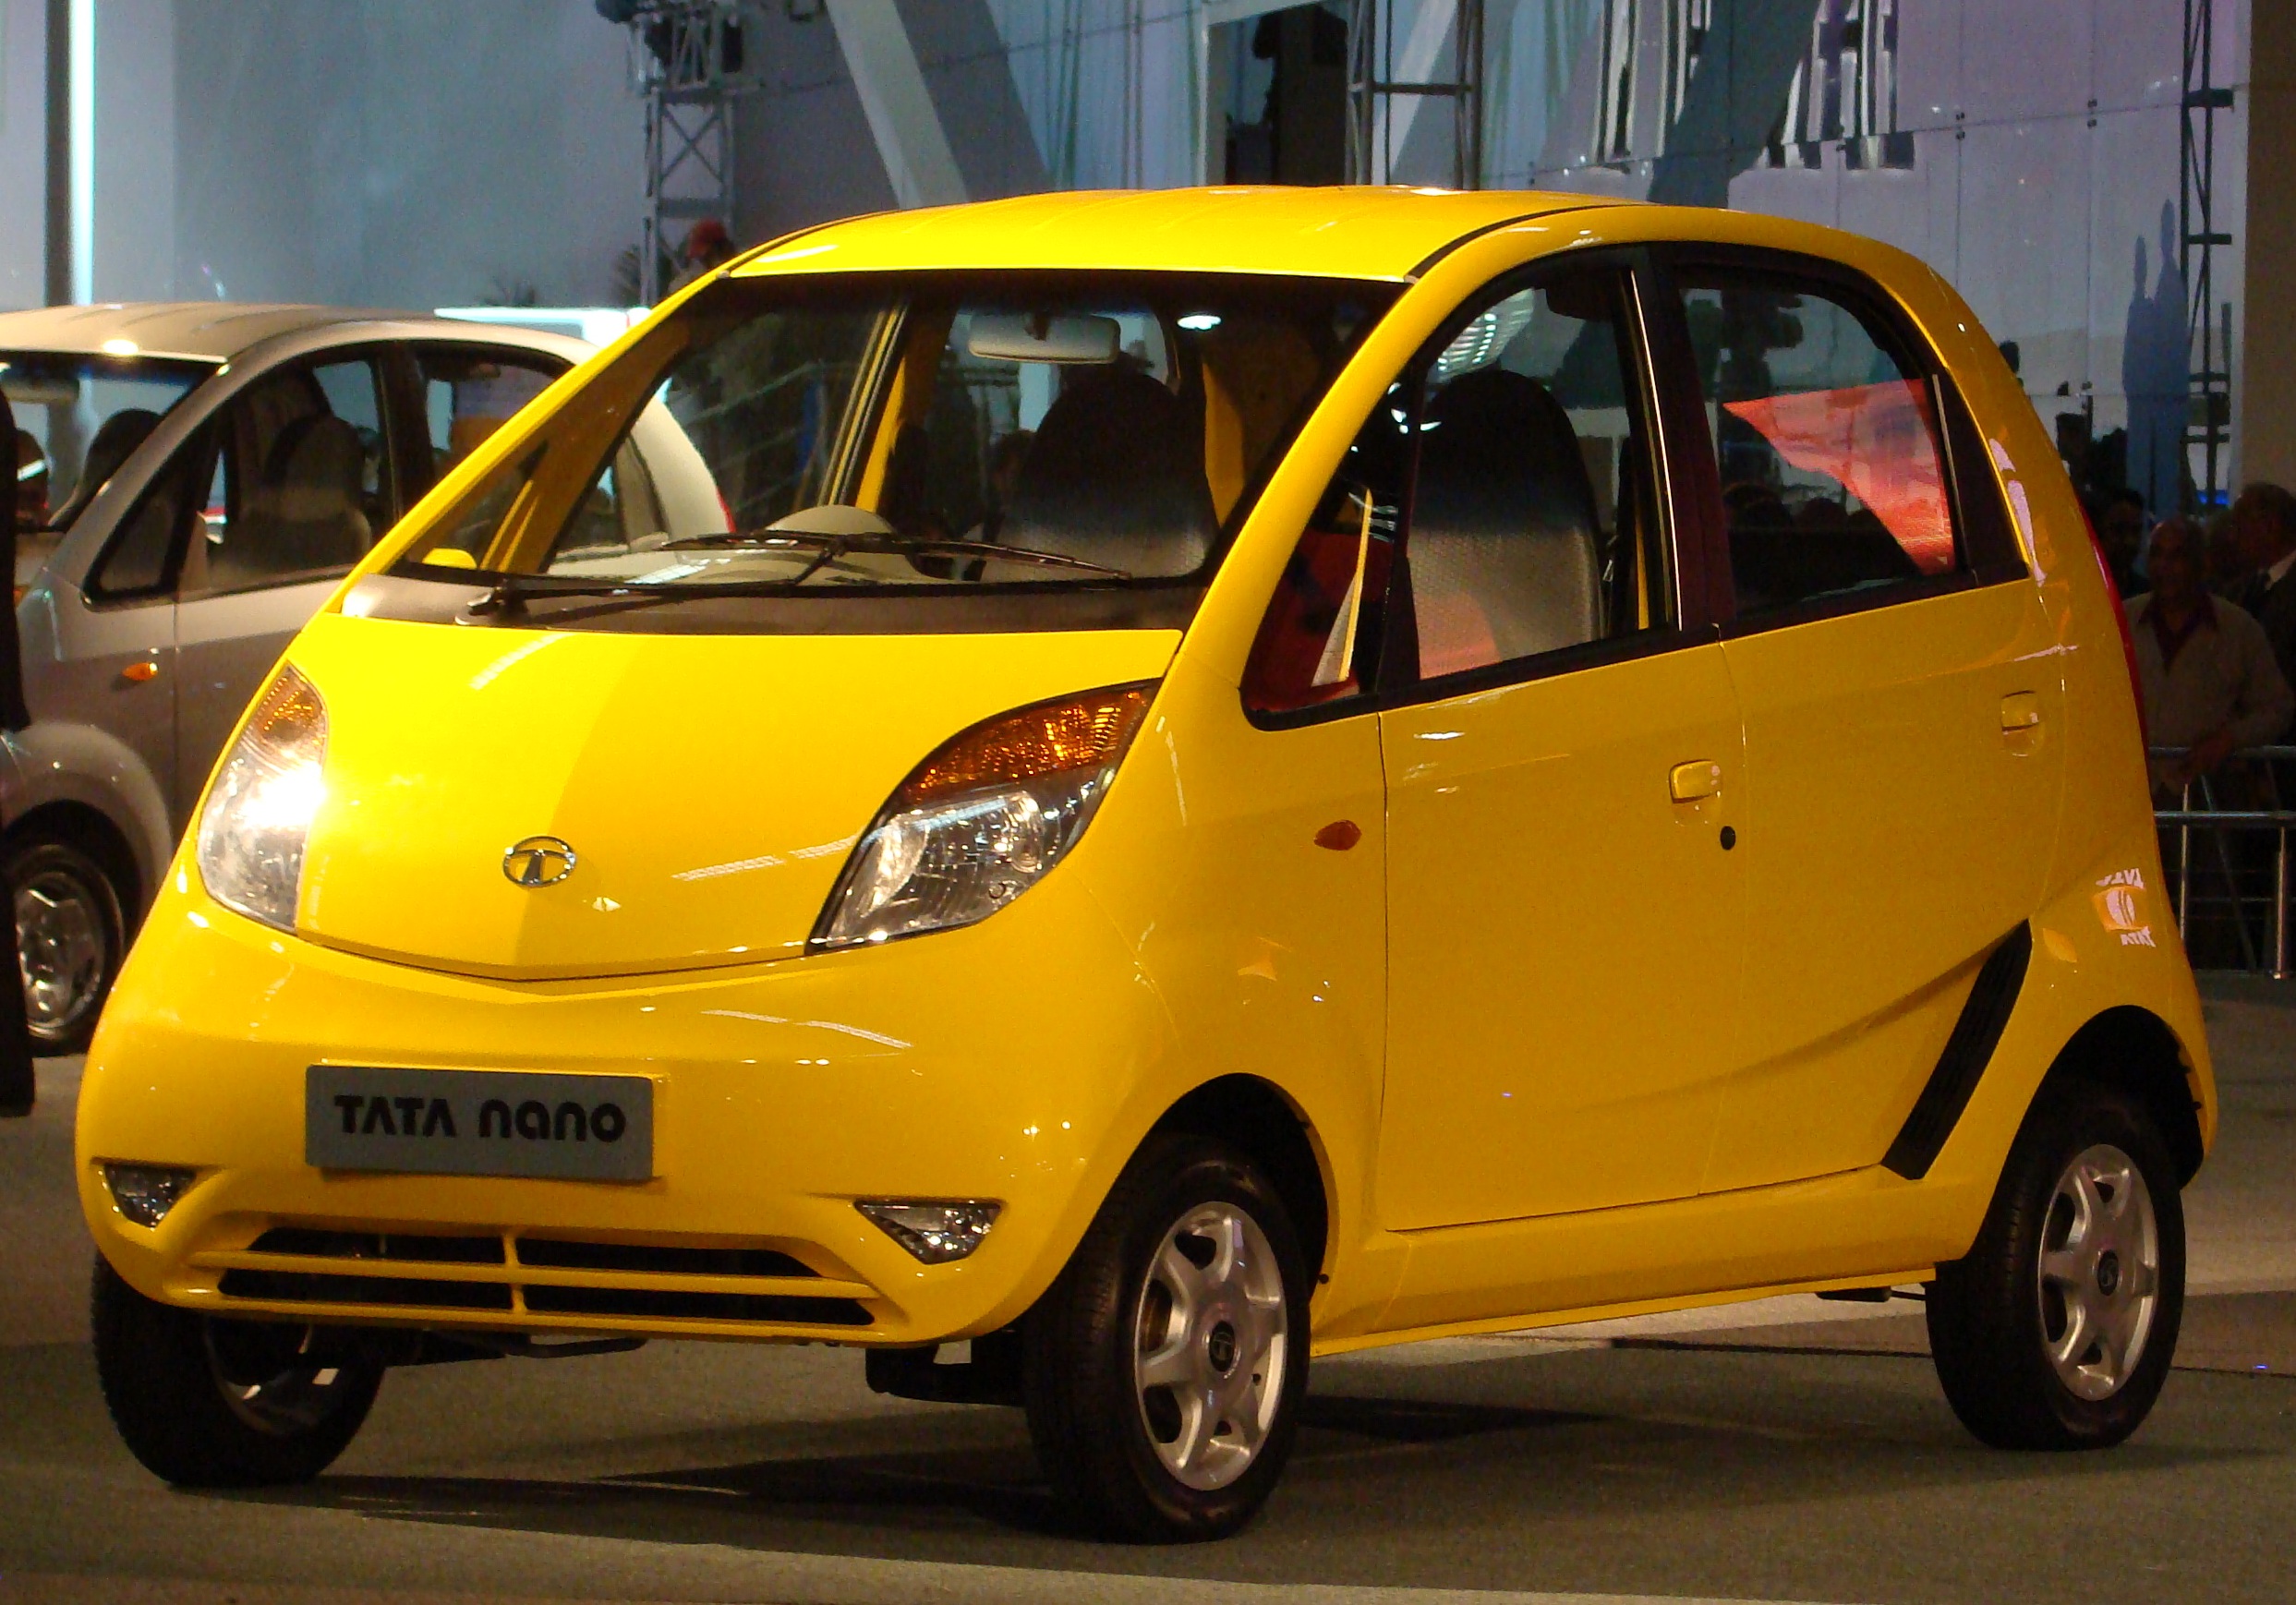 Tata Nano production halted since January, just 1 unit sold